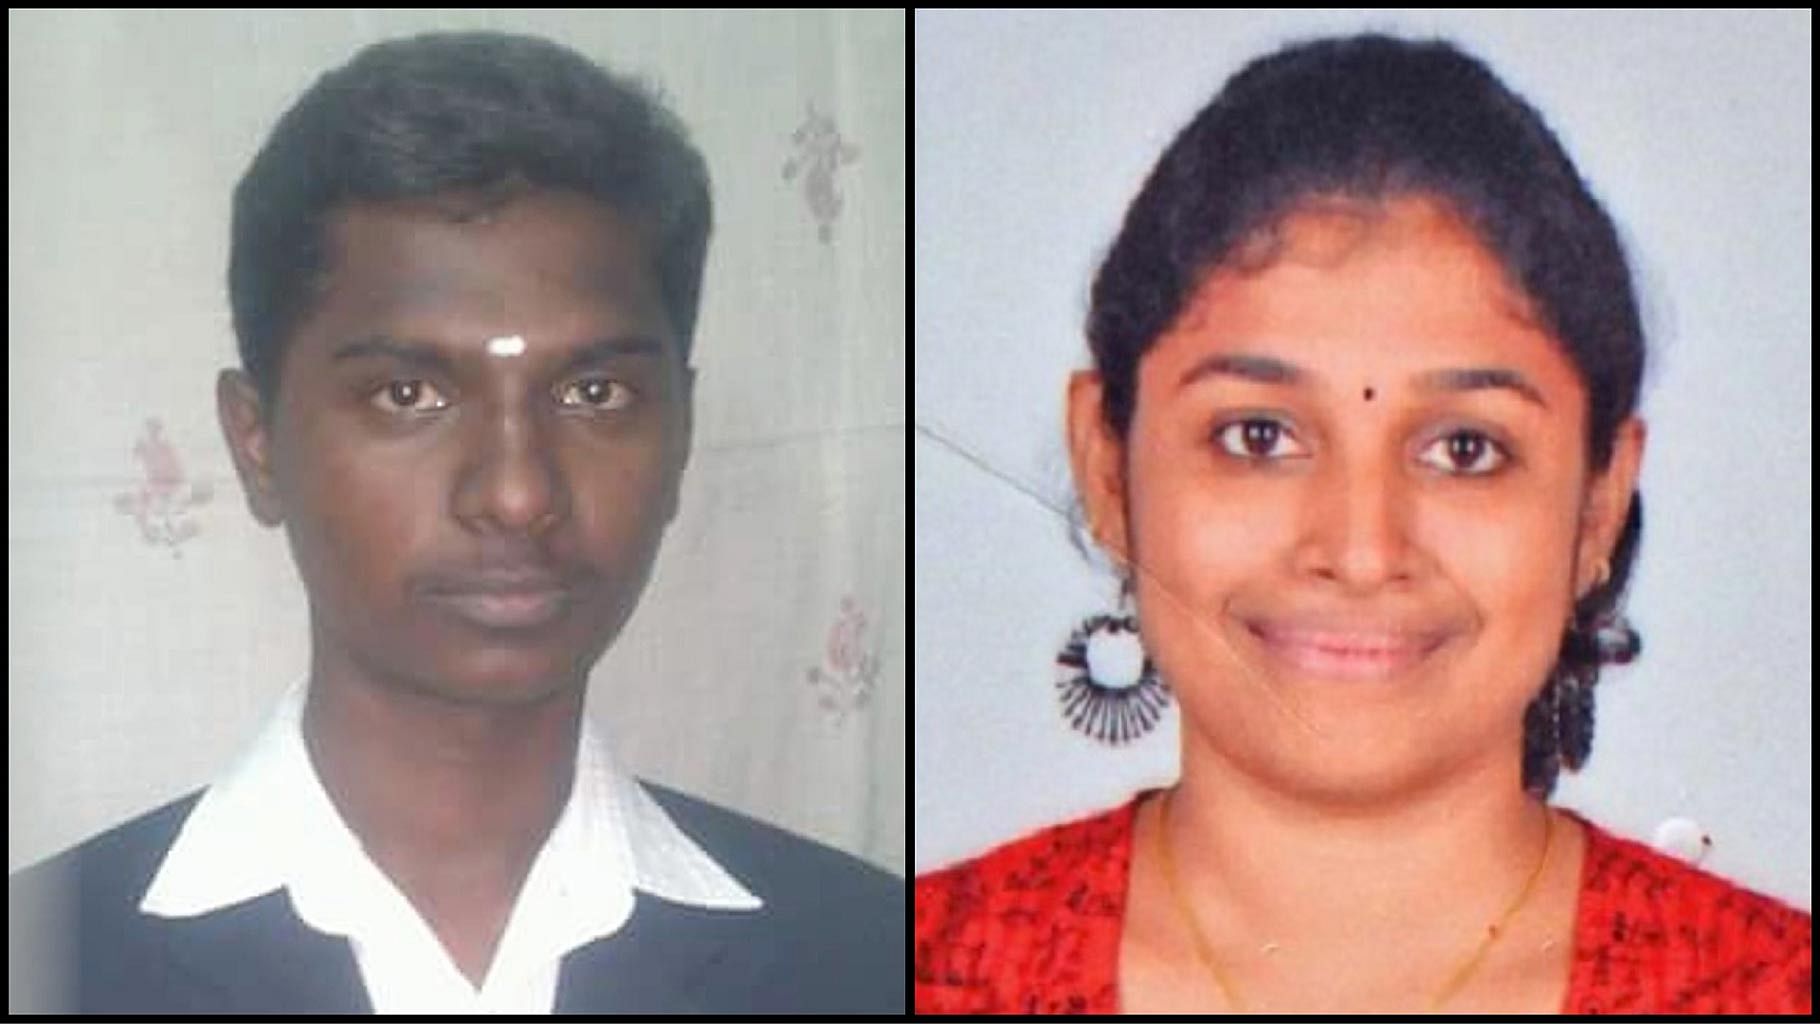 The suspect, Ramkumar, and S Swathi who was hacked to death at the Nungambakkam railway station in Chennai. (Photo: The Quint)